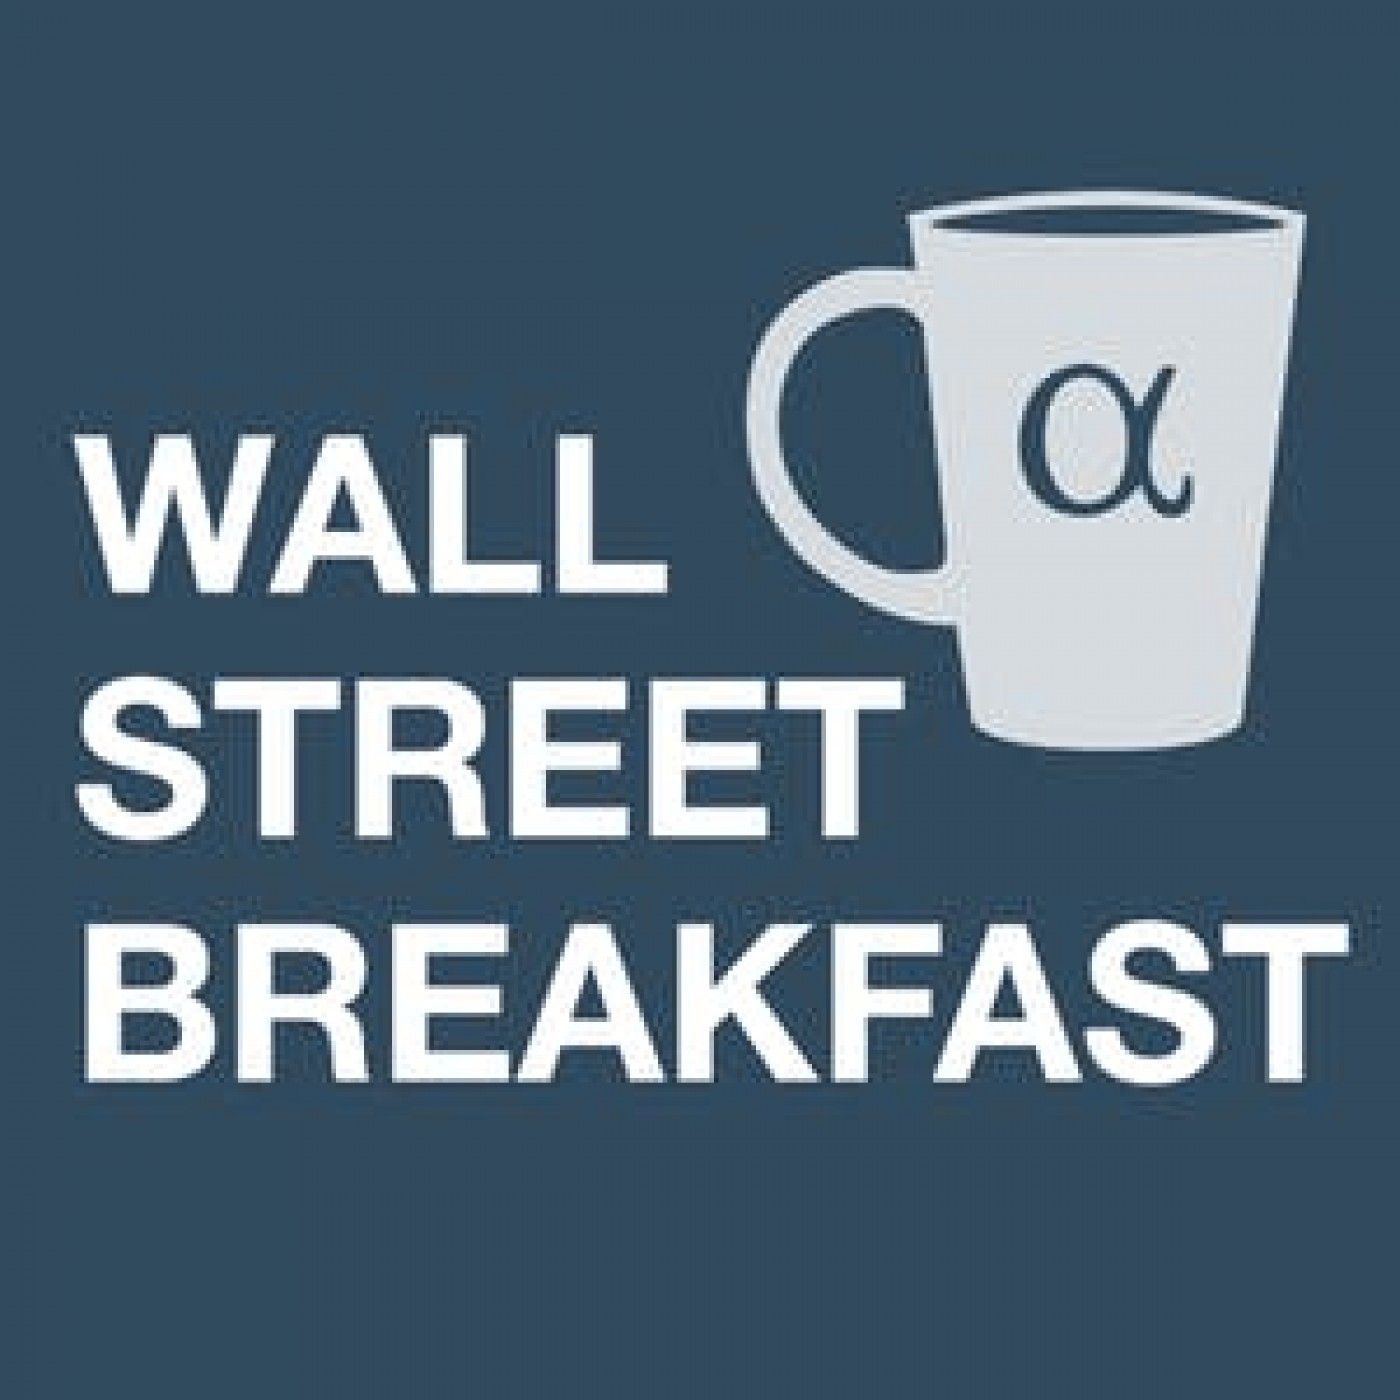 Wall Street Breakfast July 20: Chips for America Act Passes First Procedural Hurdle in the Senate